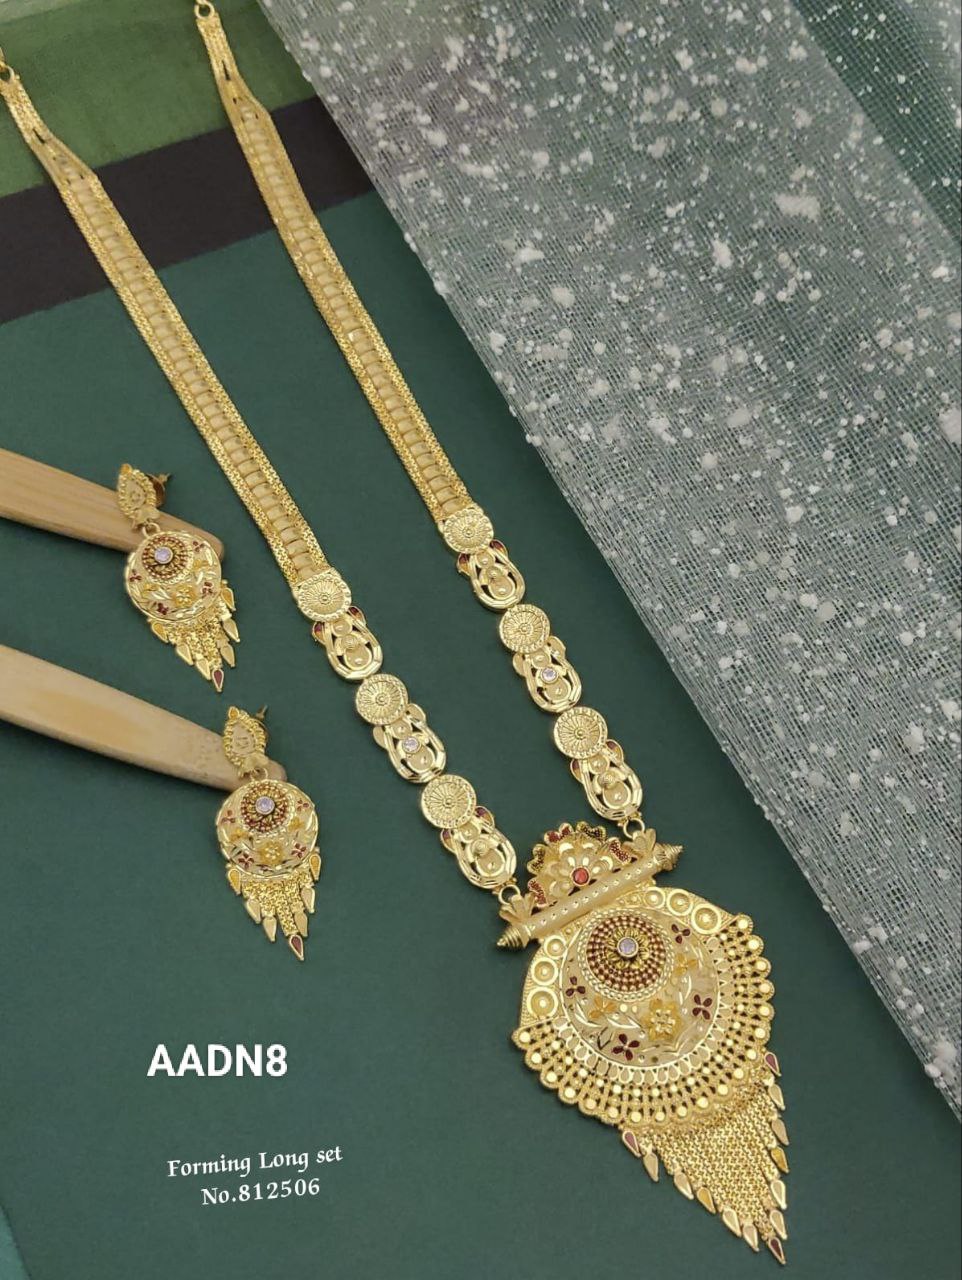 Women-Forming-Necklace set